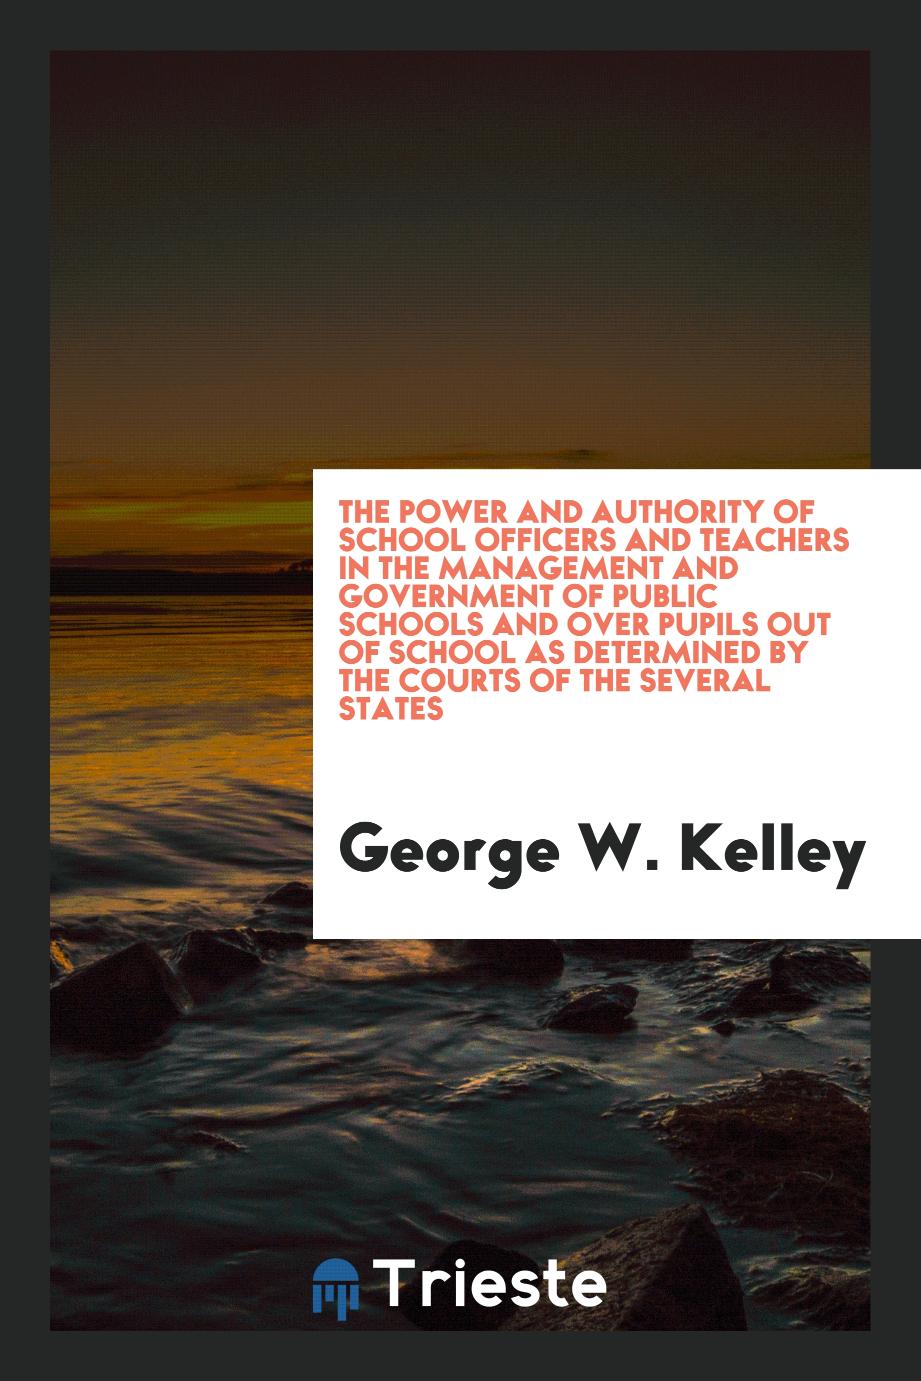 The power and authority of school officers and teachers in the management and government of public schools and over pupils out of school as determined by the courts of the several states